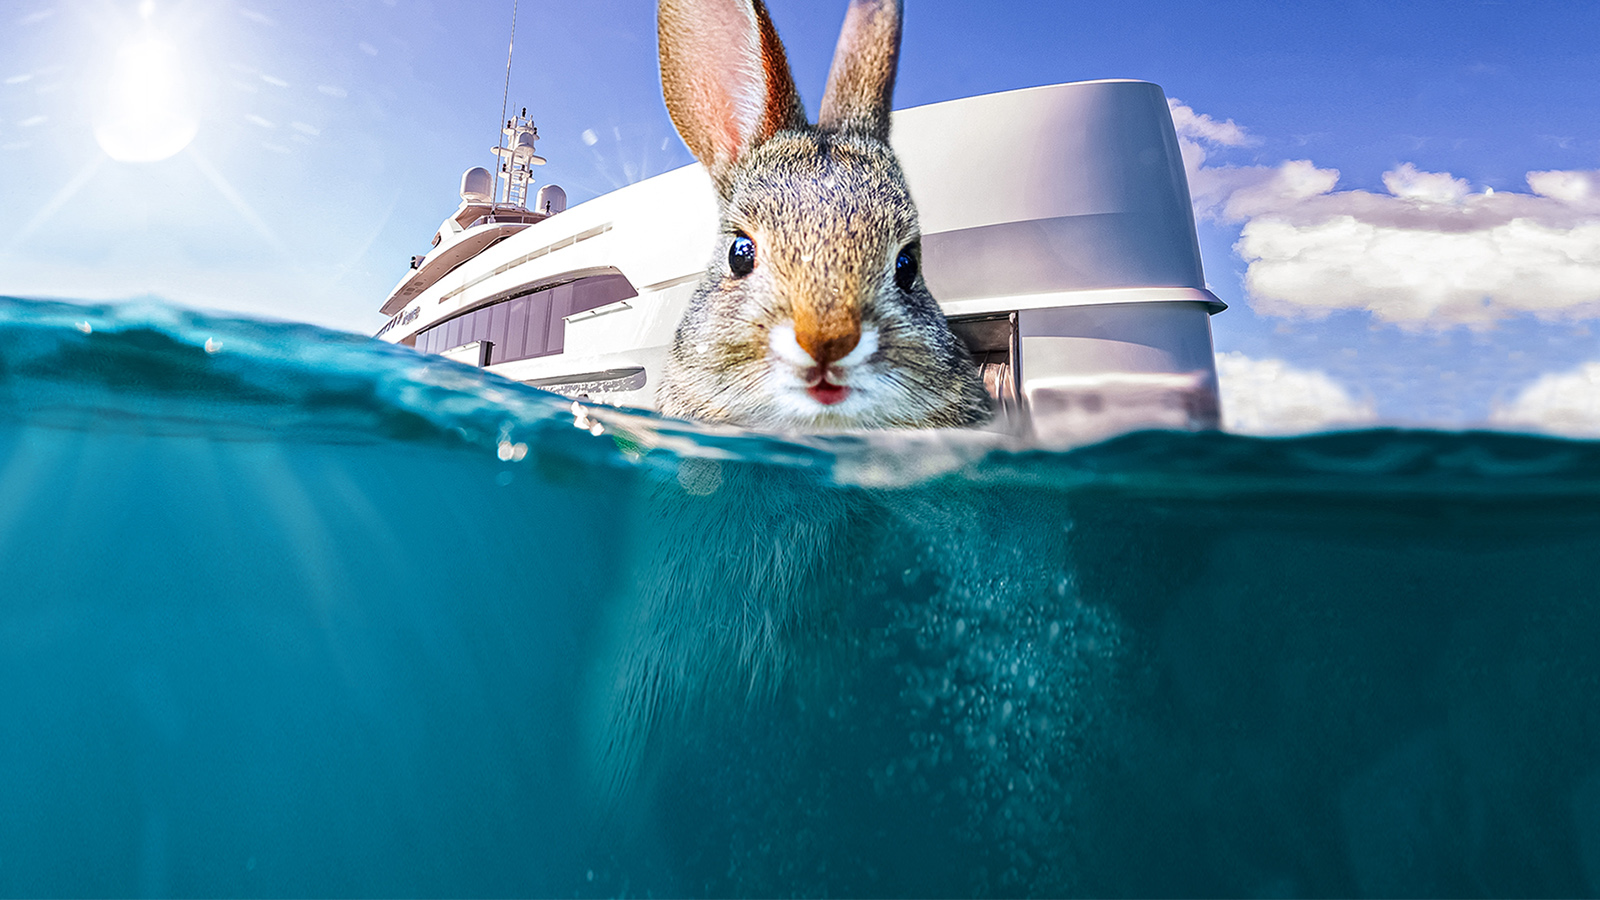 The Year of the Water Rabbit: What’s in store for Heesen Yachts in 2023